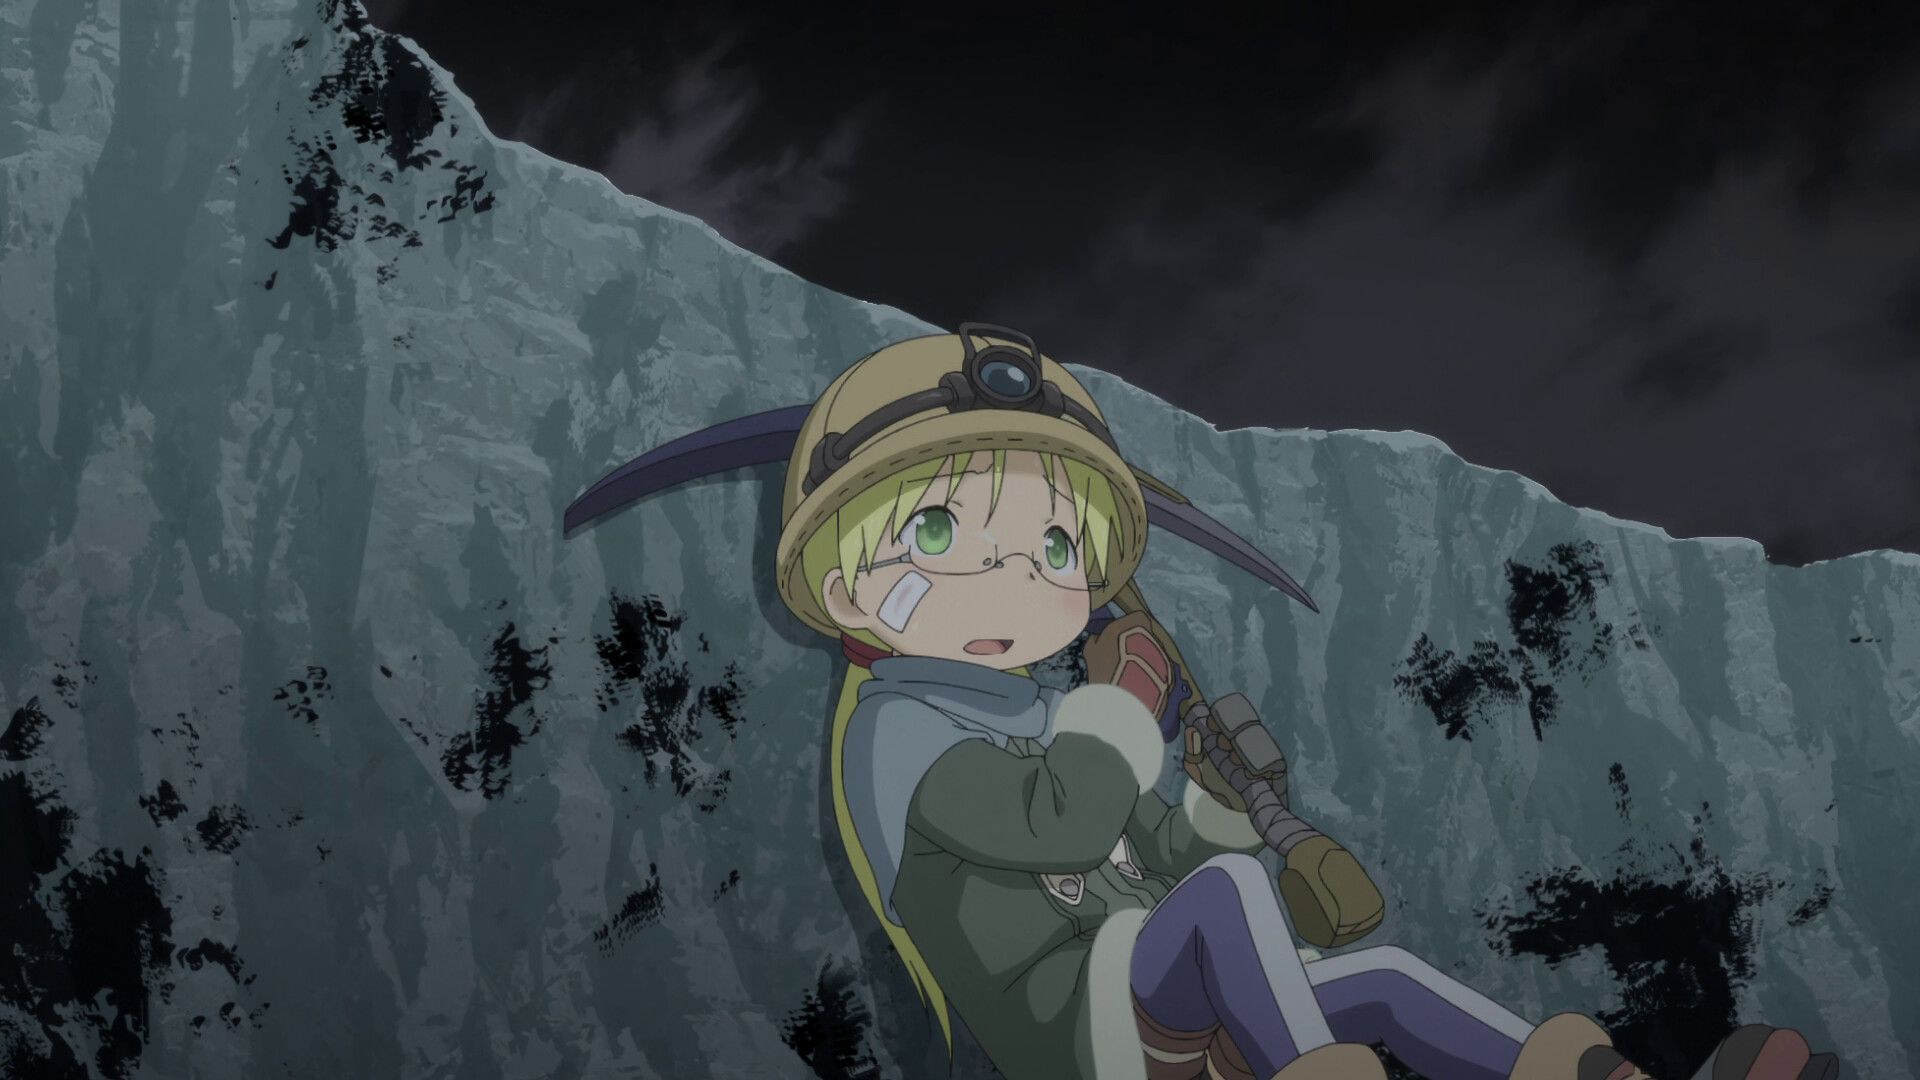 Made in Abyss: Dawn of the Deep Soul: Riko, a 12-year-old orphan from the town Orth, Anime character. 1920x1080 Full HD Wallpaper.